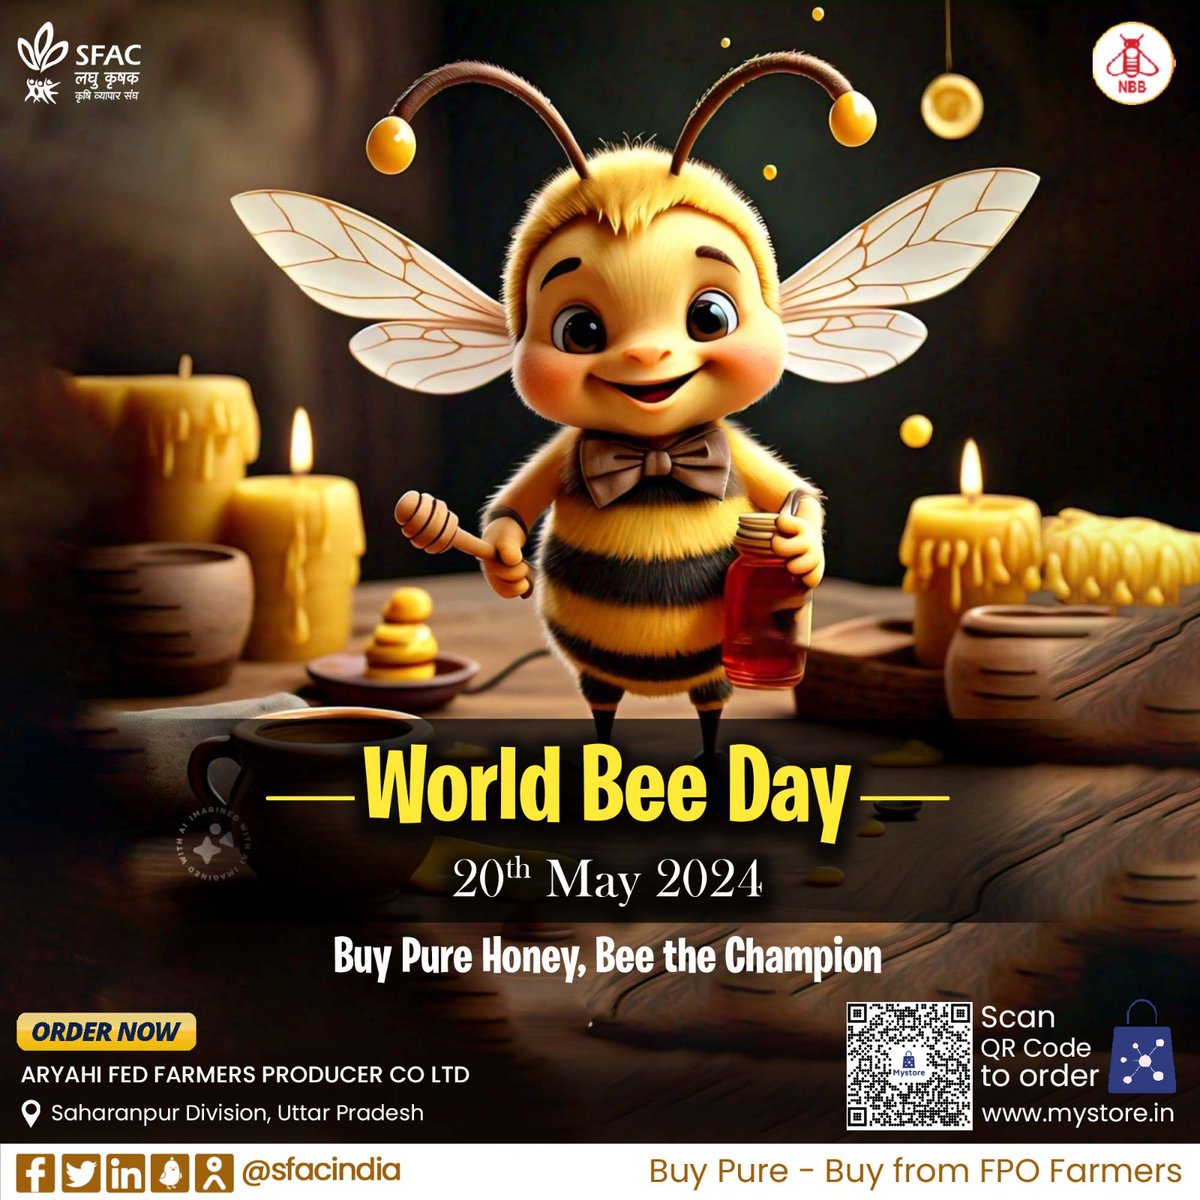 Bee the change🐝

Buy pure, unfiltered & natural honey 🍯straight from the beekeepers #FPO on #WorldBeeDay and lead a healthy lifestyle.

Order link👇

mystore.in/en/seller/arya…

🐝🍯

#NBB #VocalForLocal #FoodHeroes #SavetheBees #BeeEngaged #healthychoices #healthyeating